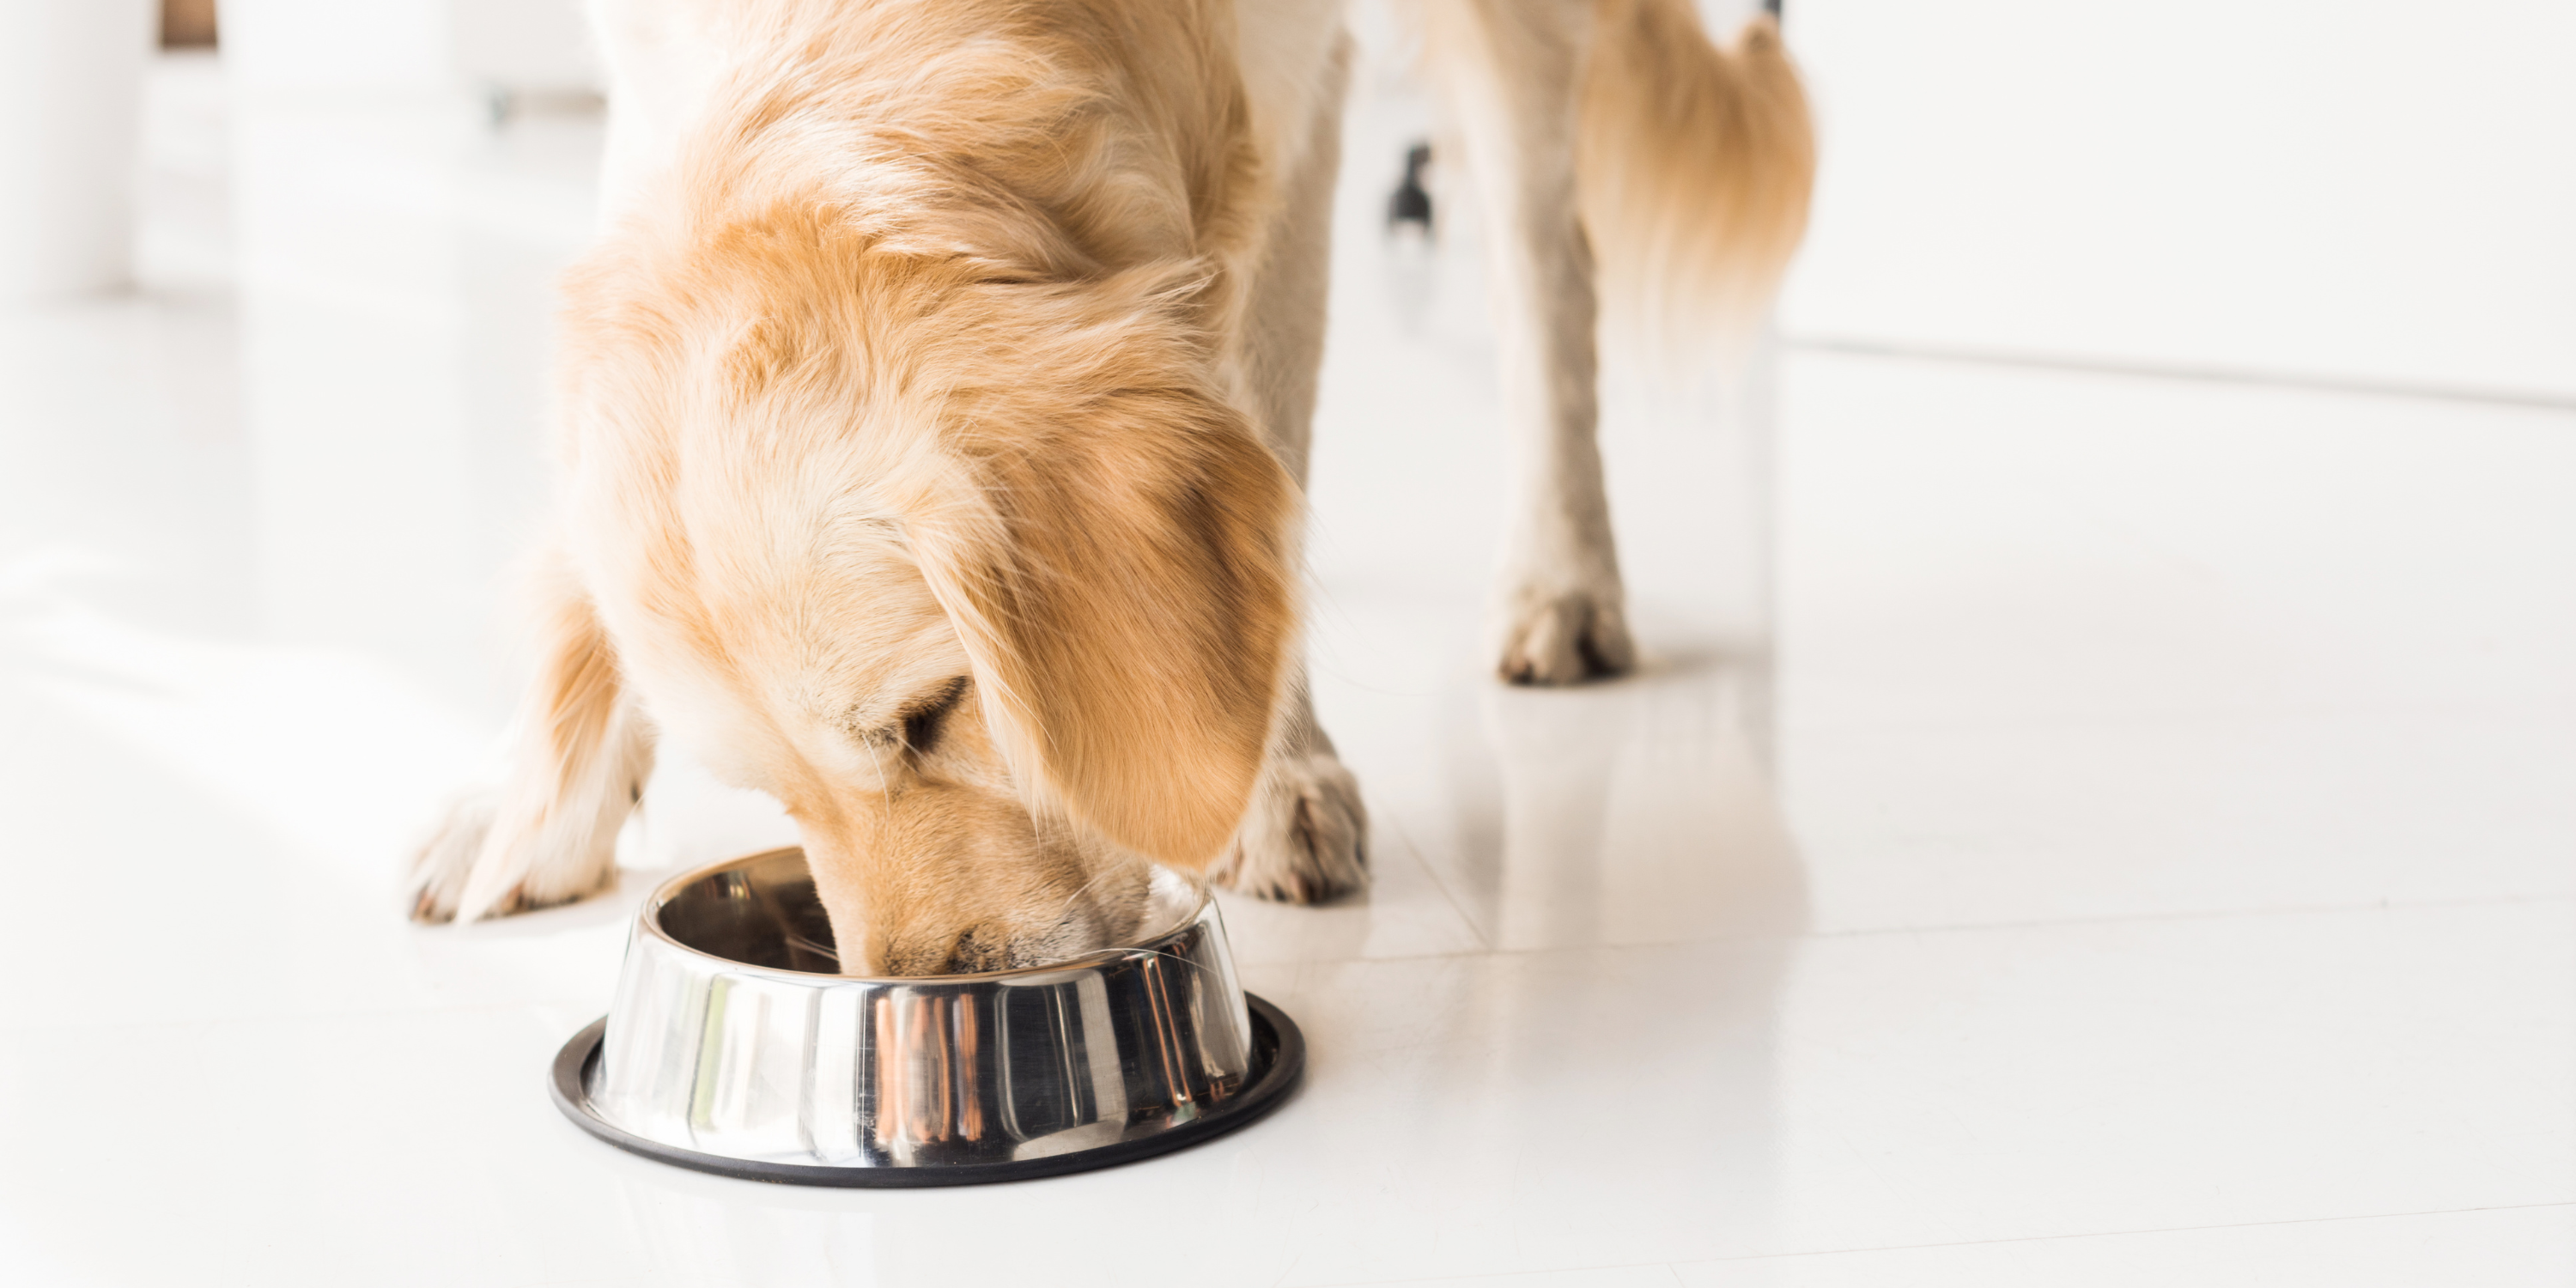 8 Tips on How to Clean Dog Bowls—and Why